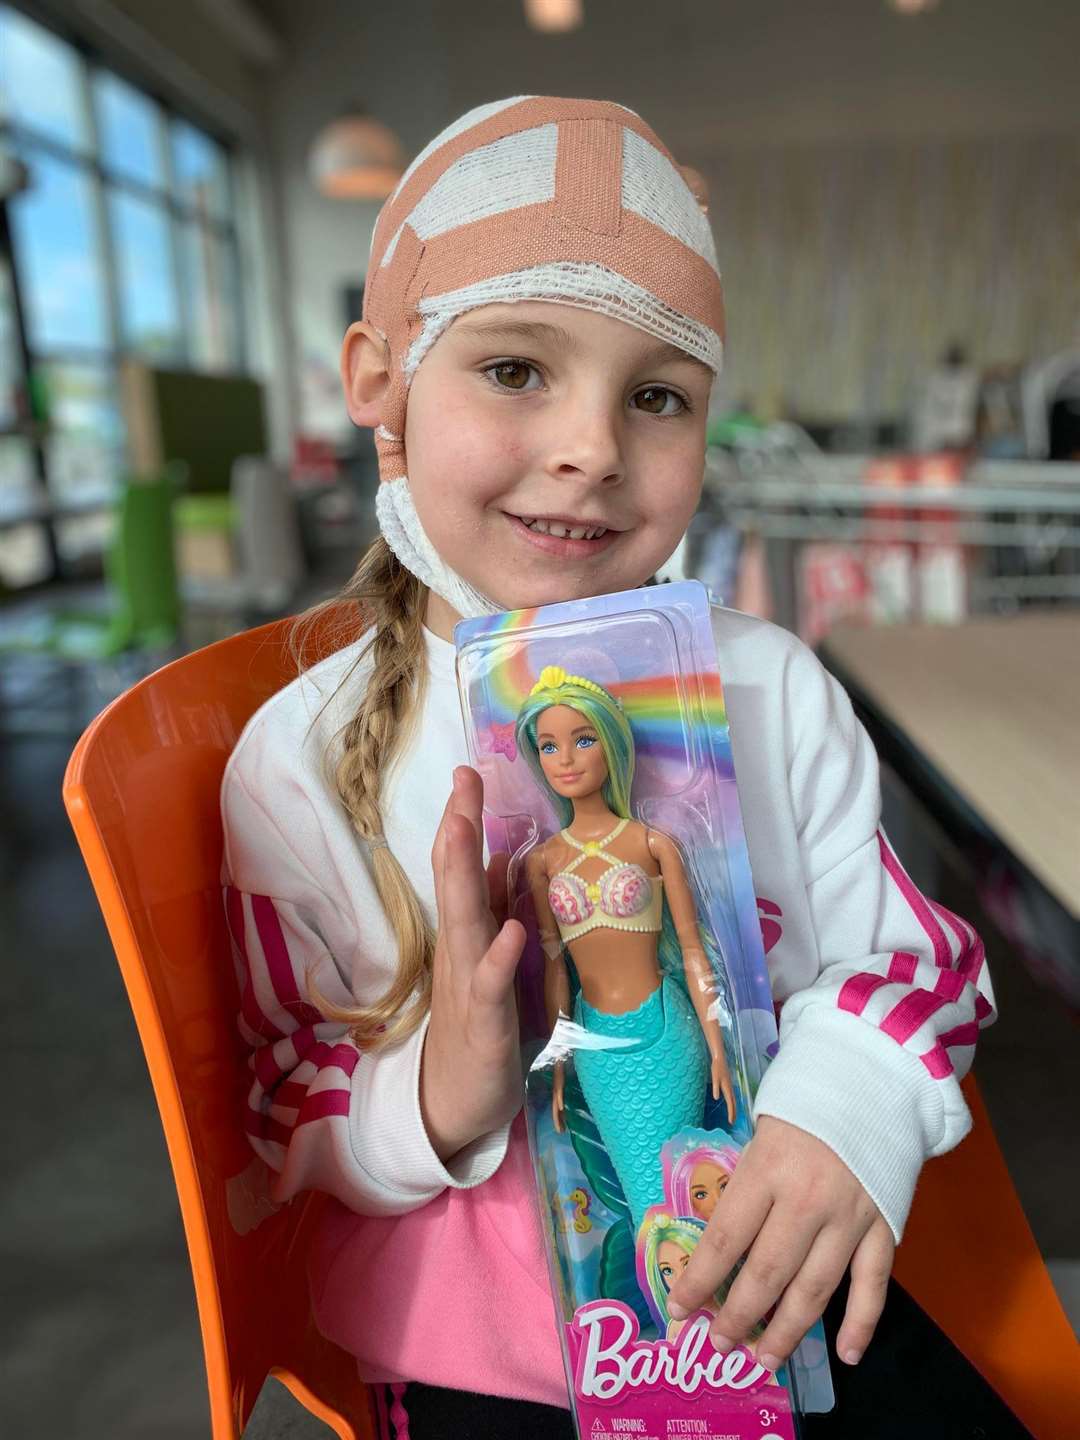 Grace with her new Barbie toy gifted to her by a stranger in Asda